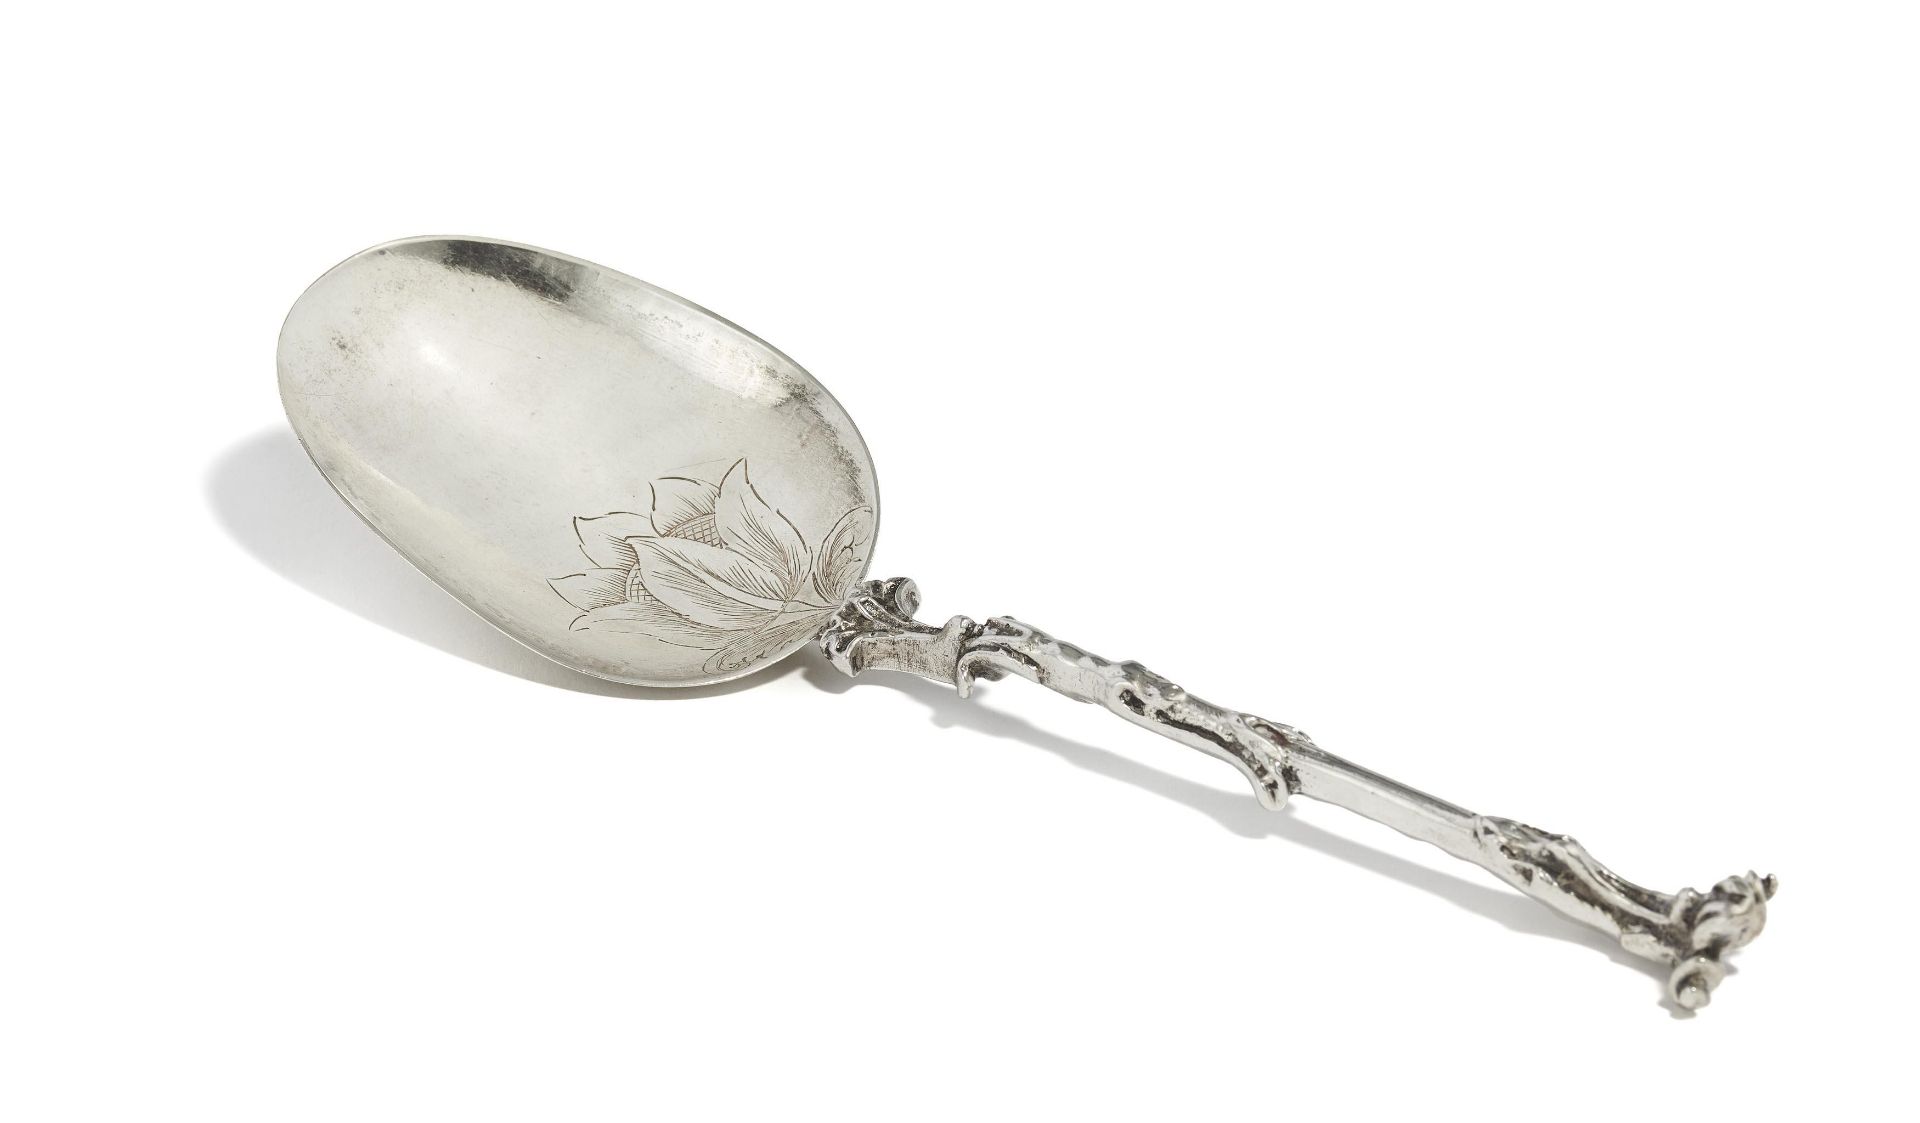 Spoon engraved with tulips